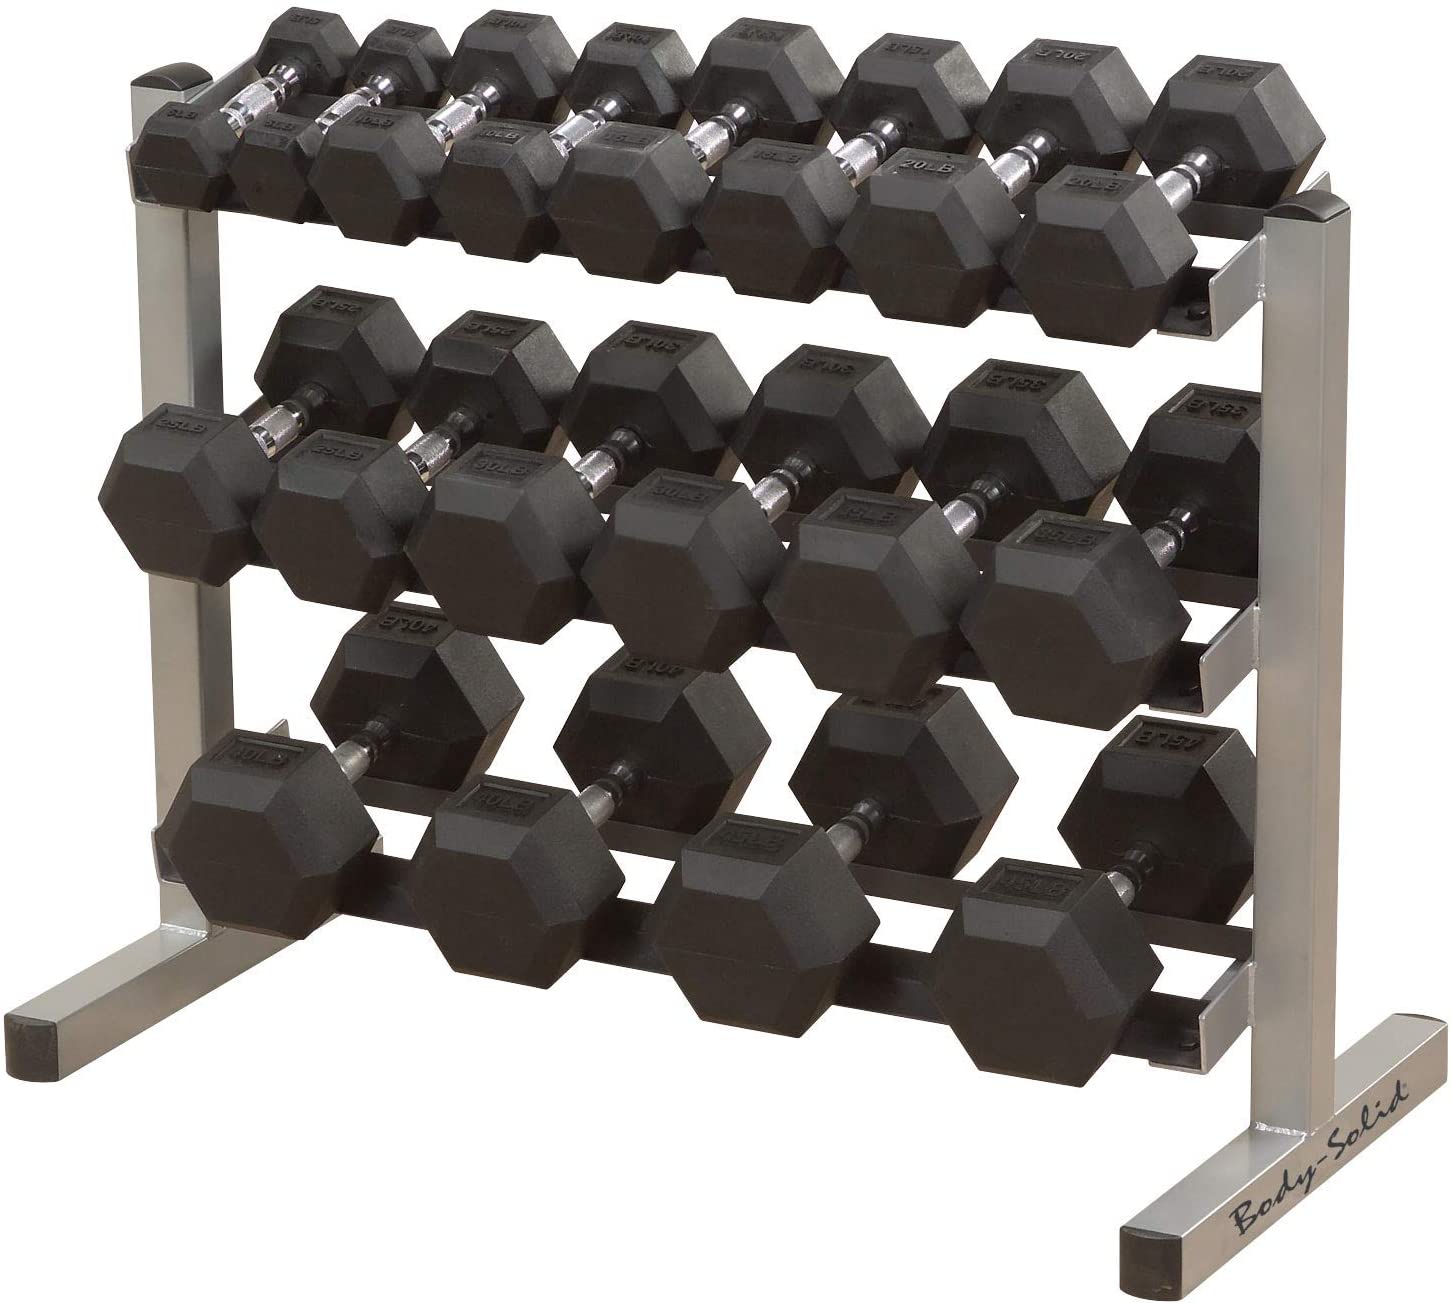 Body-Solid 60" Heavy Duty Dumbbell Rack with 3rd Tier